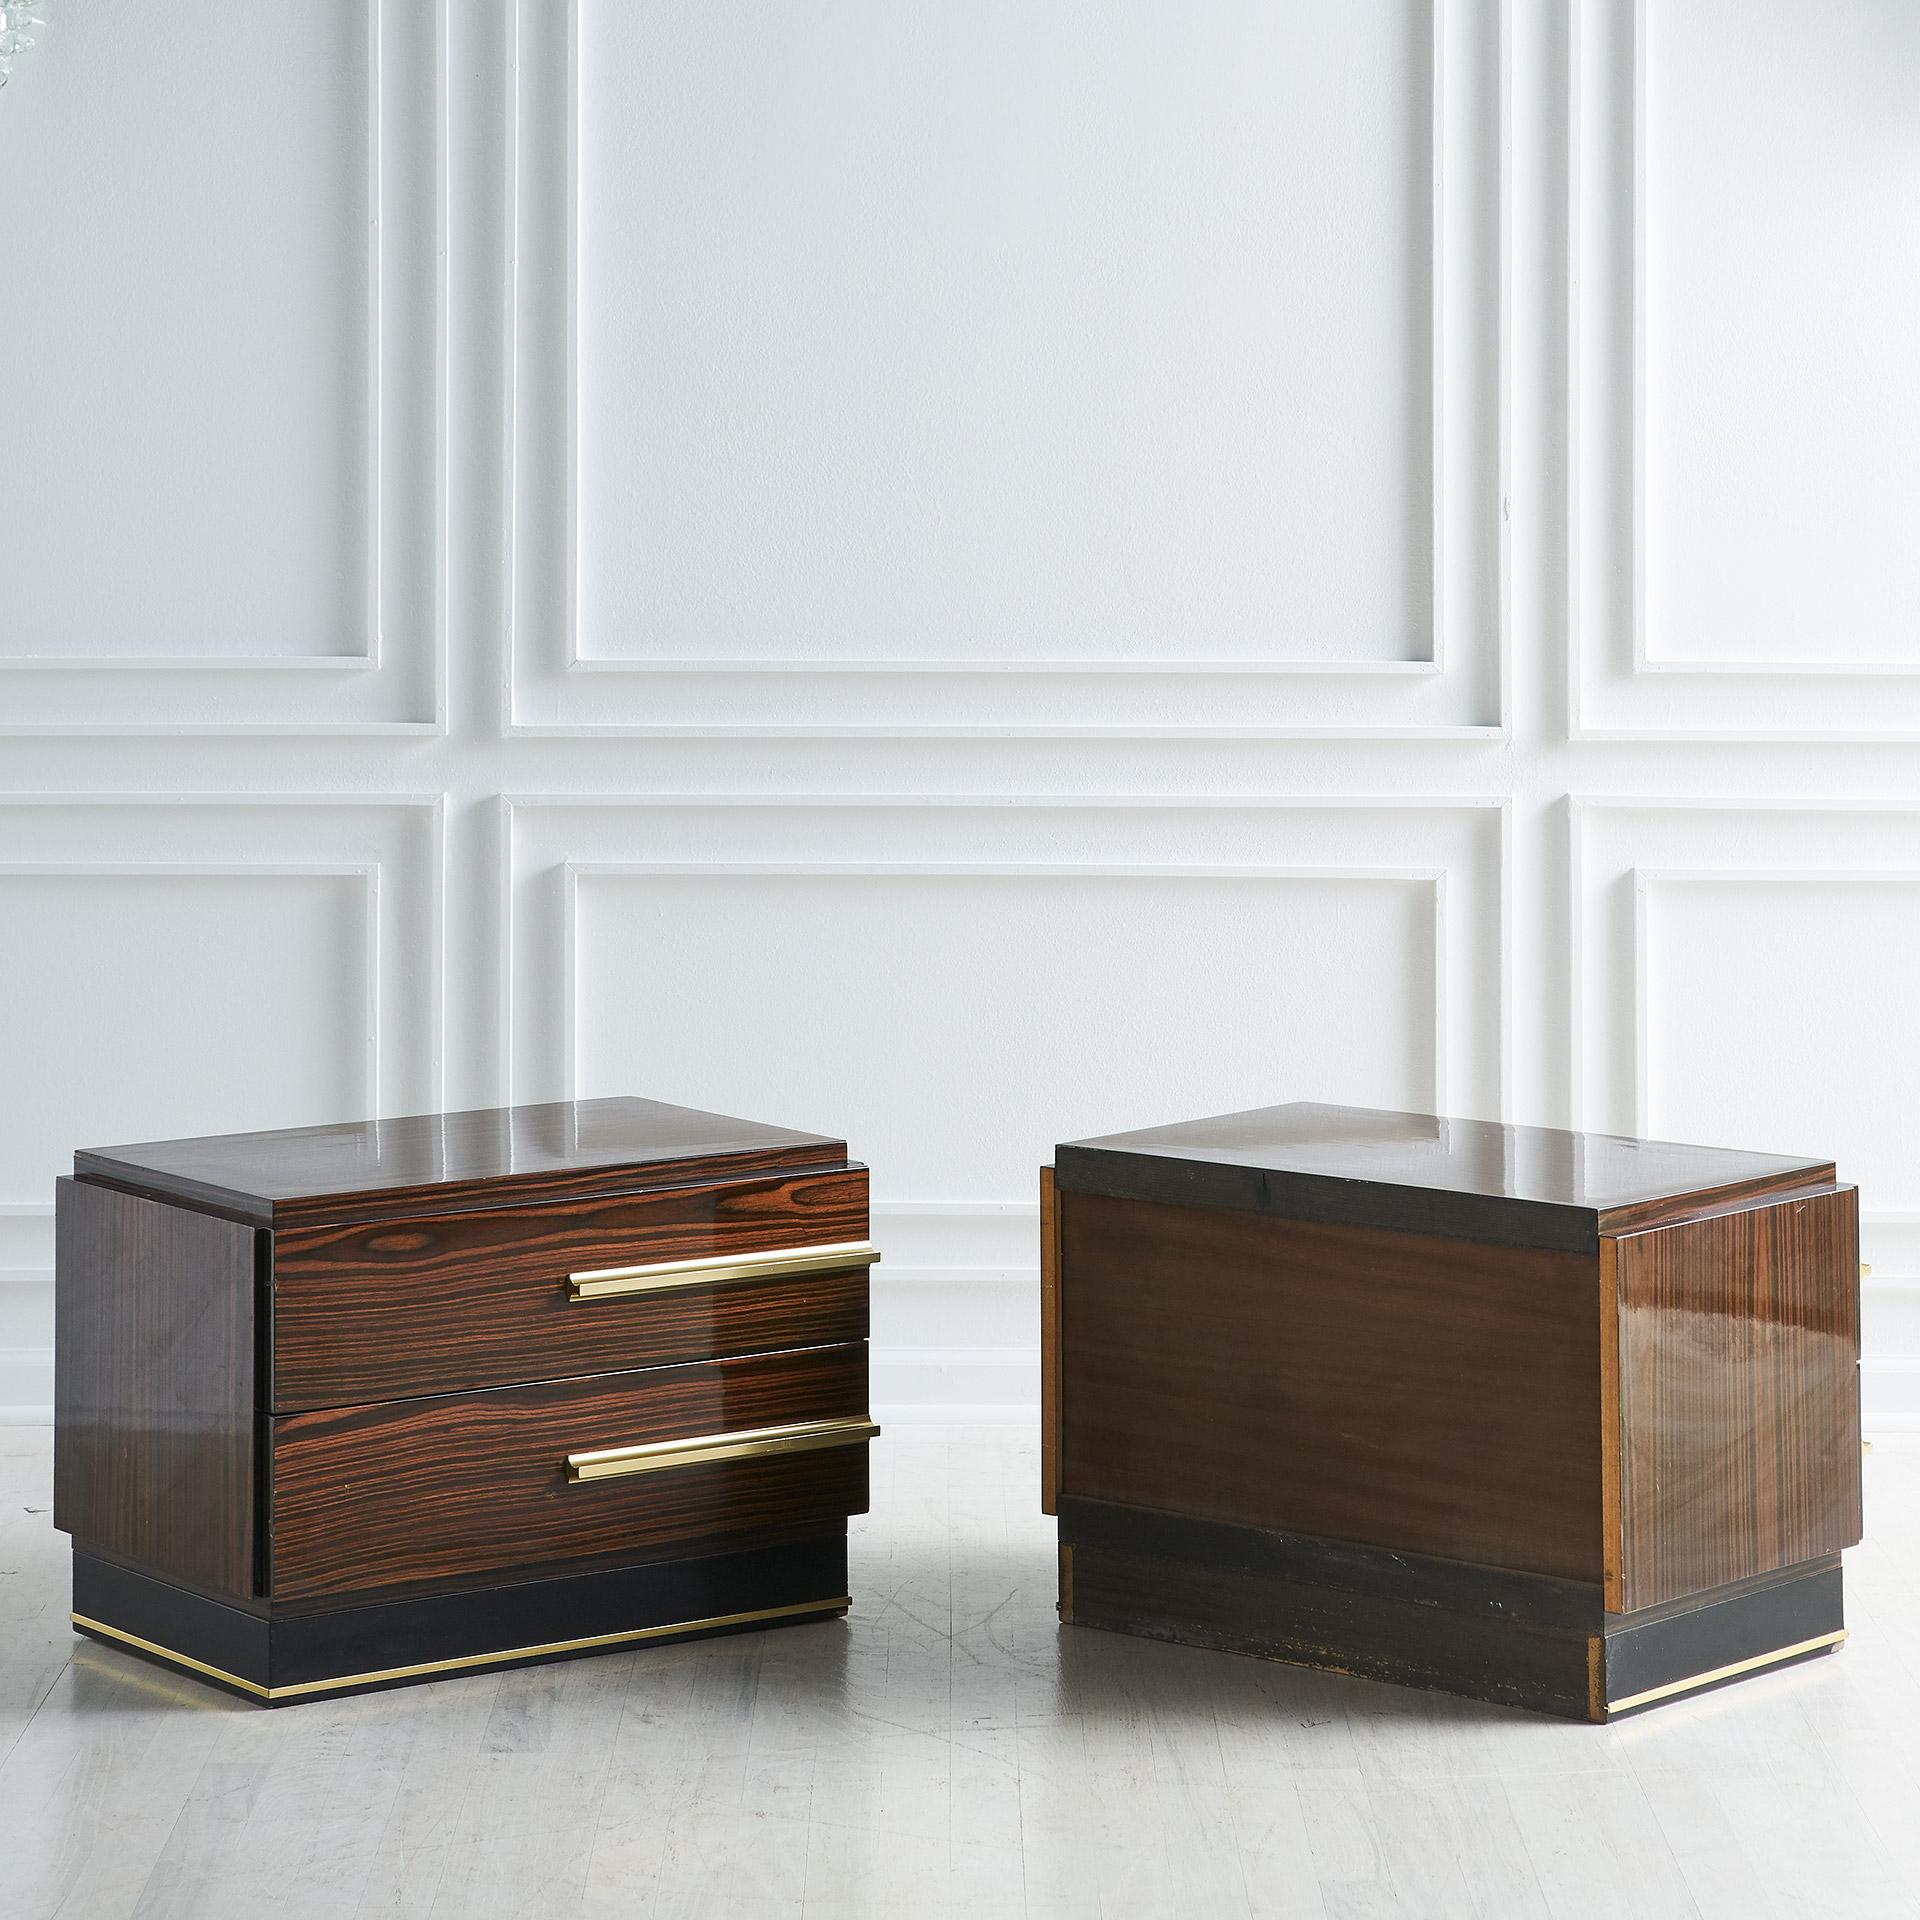 A pair of modern, low nightstands by Italian designer, artist, and musician Luciano Frigerio, (1928-1999). Featuring a rosewood veneer, long brass finish handles, and a plinth base.